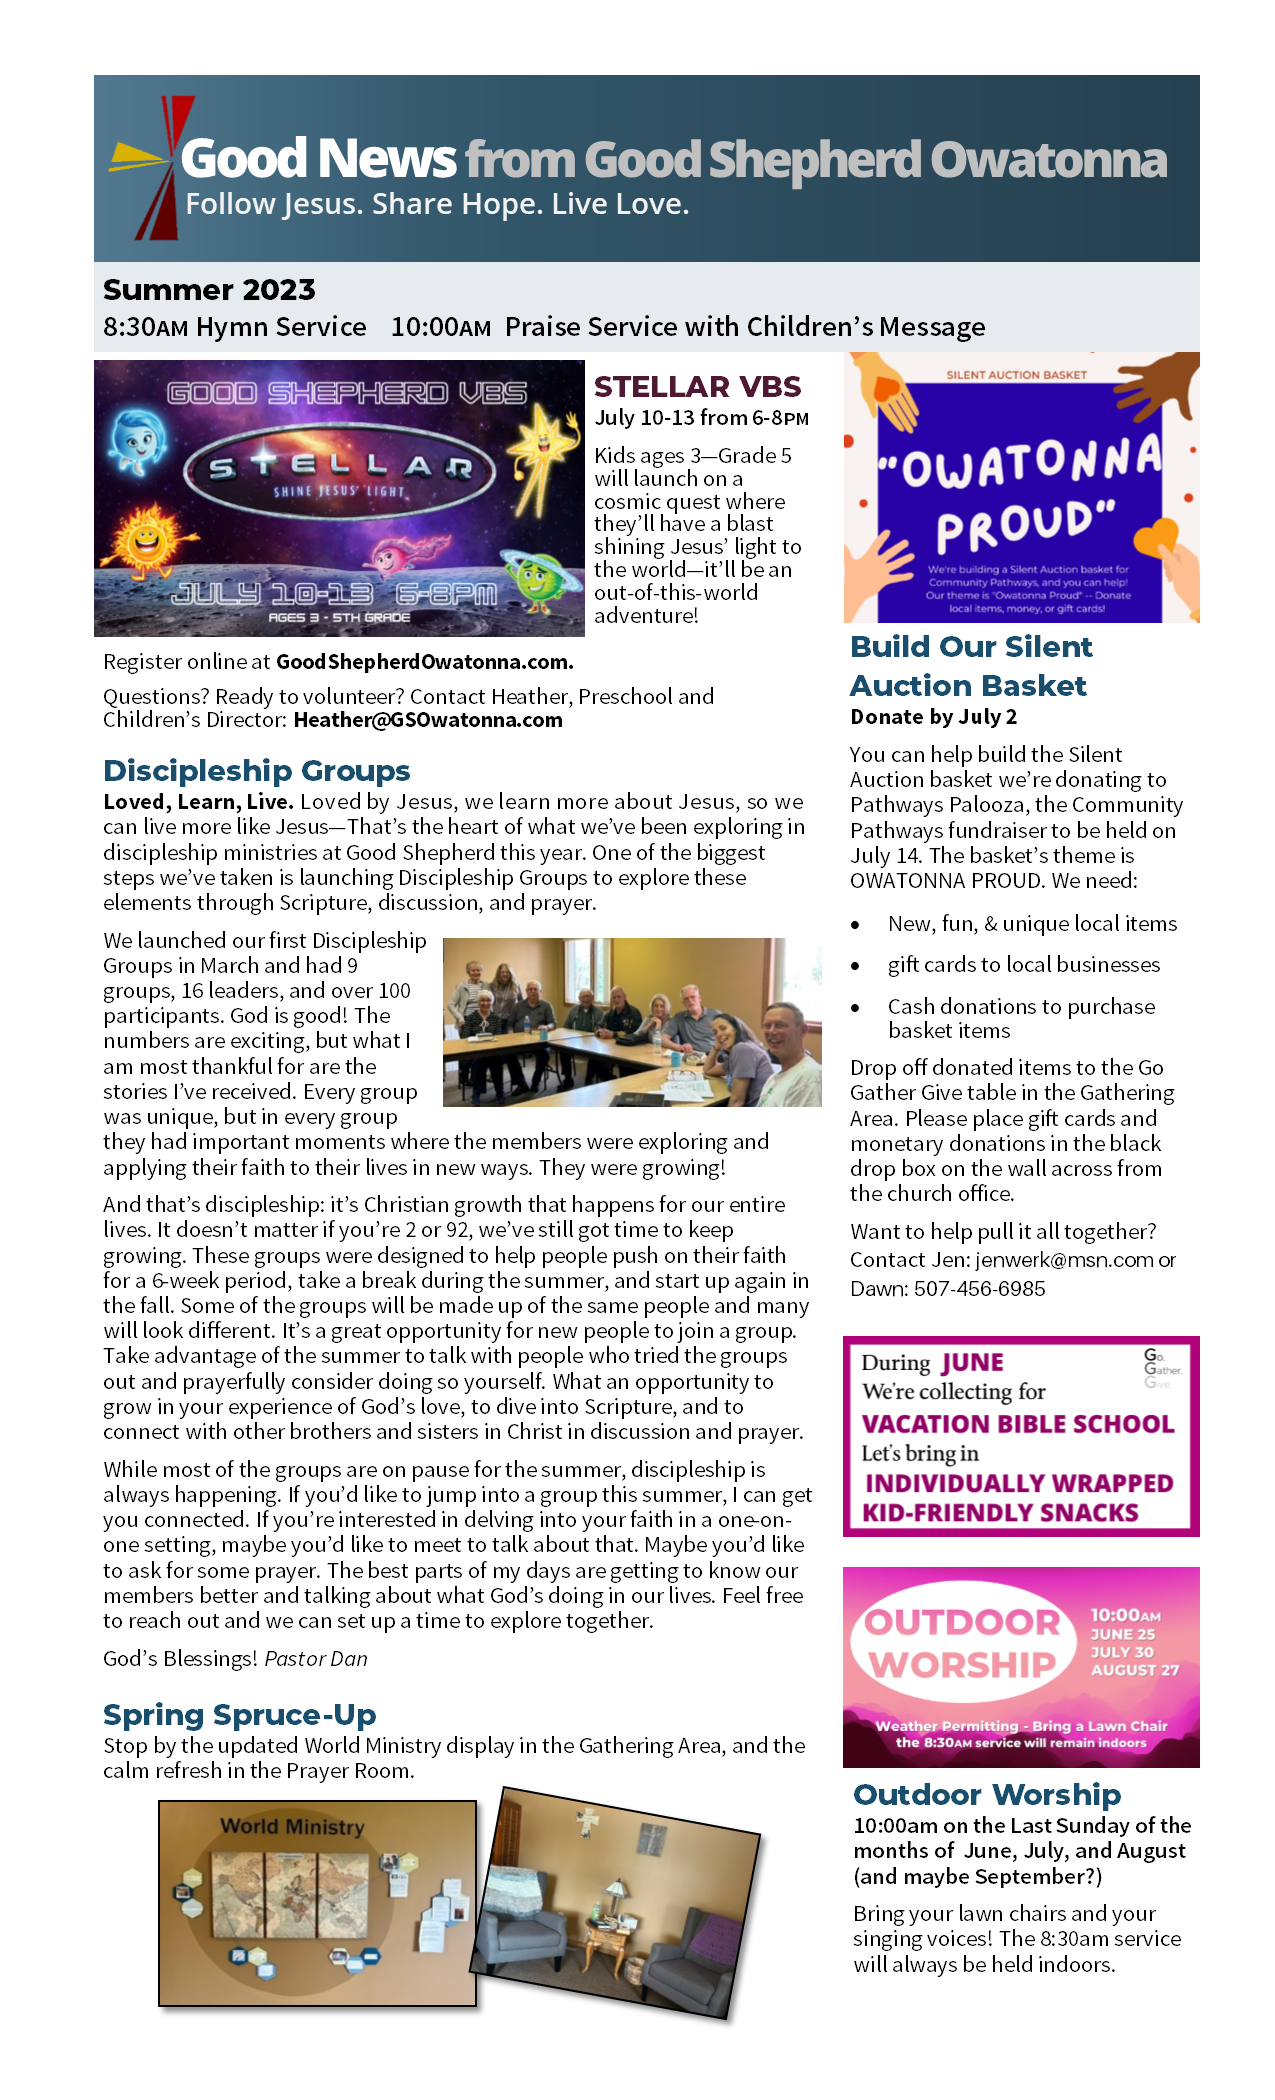 The front page of the summer newsletter as a tiny unreadable photo.